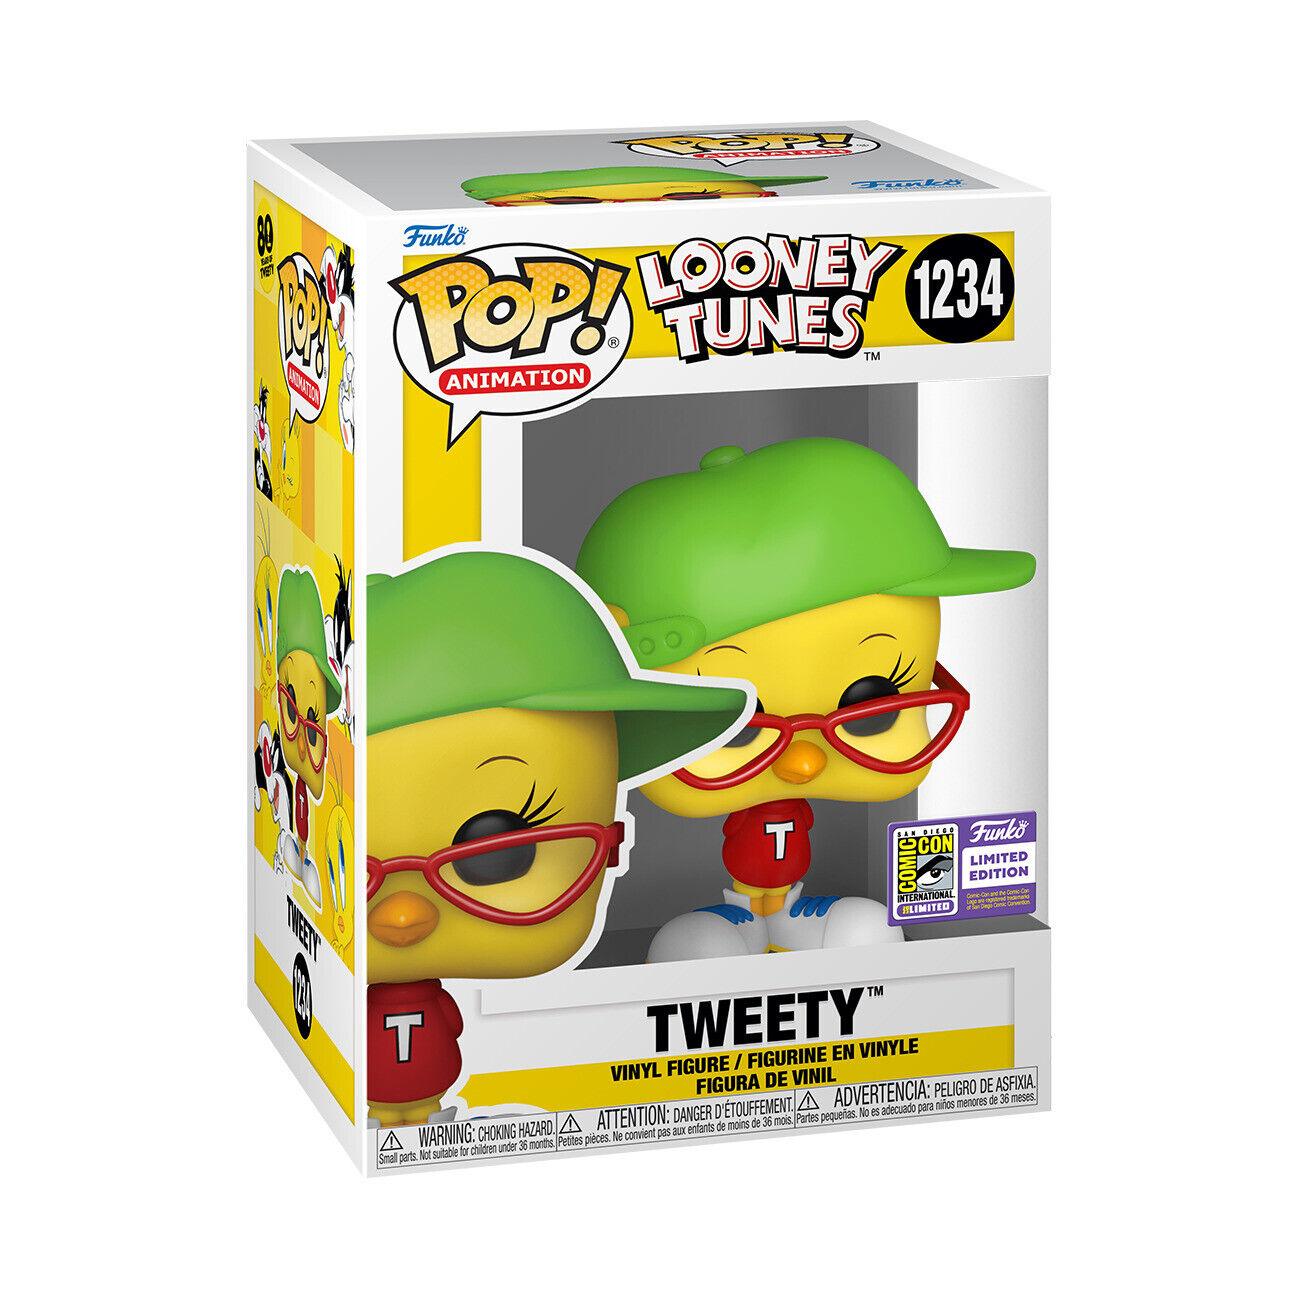 Pop! Animation - Looney Tunes - Tweety - #1234 - 2023 San Diego Comic Con LIMITED Edition EXCLUSIVE - Hobby Champion Inc